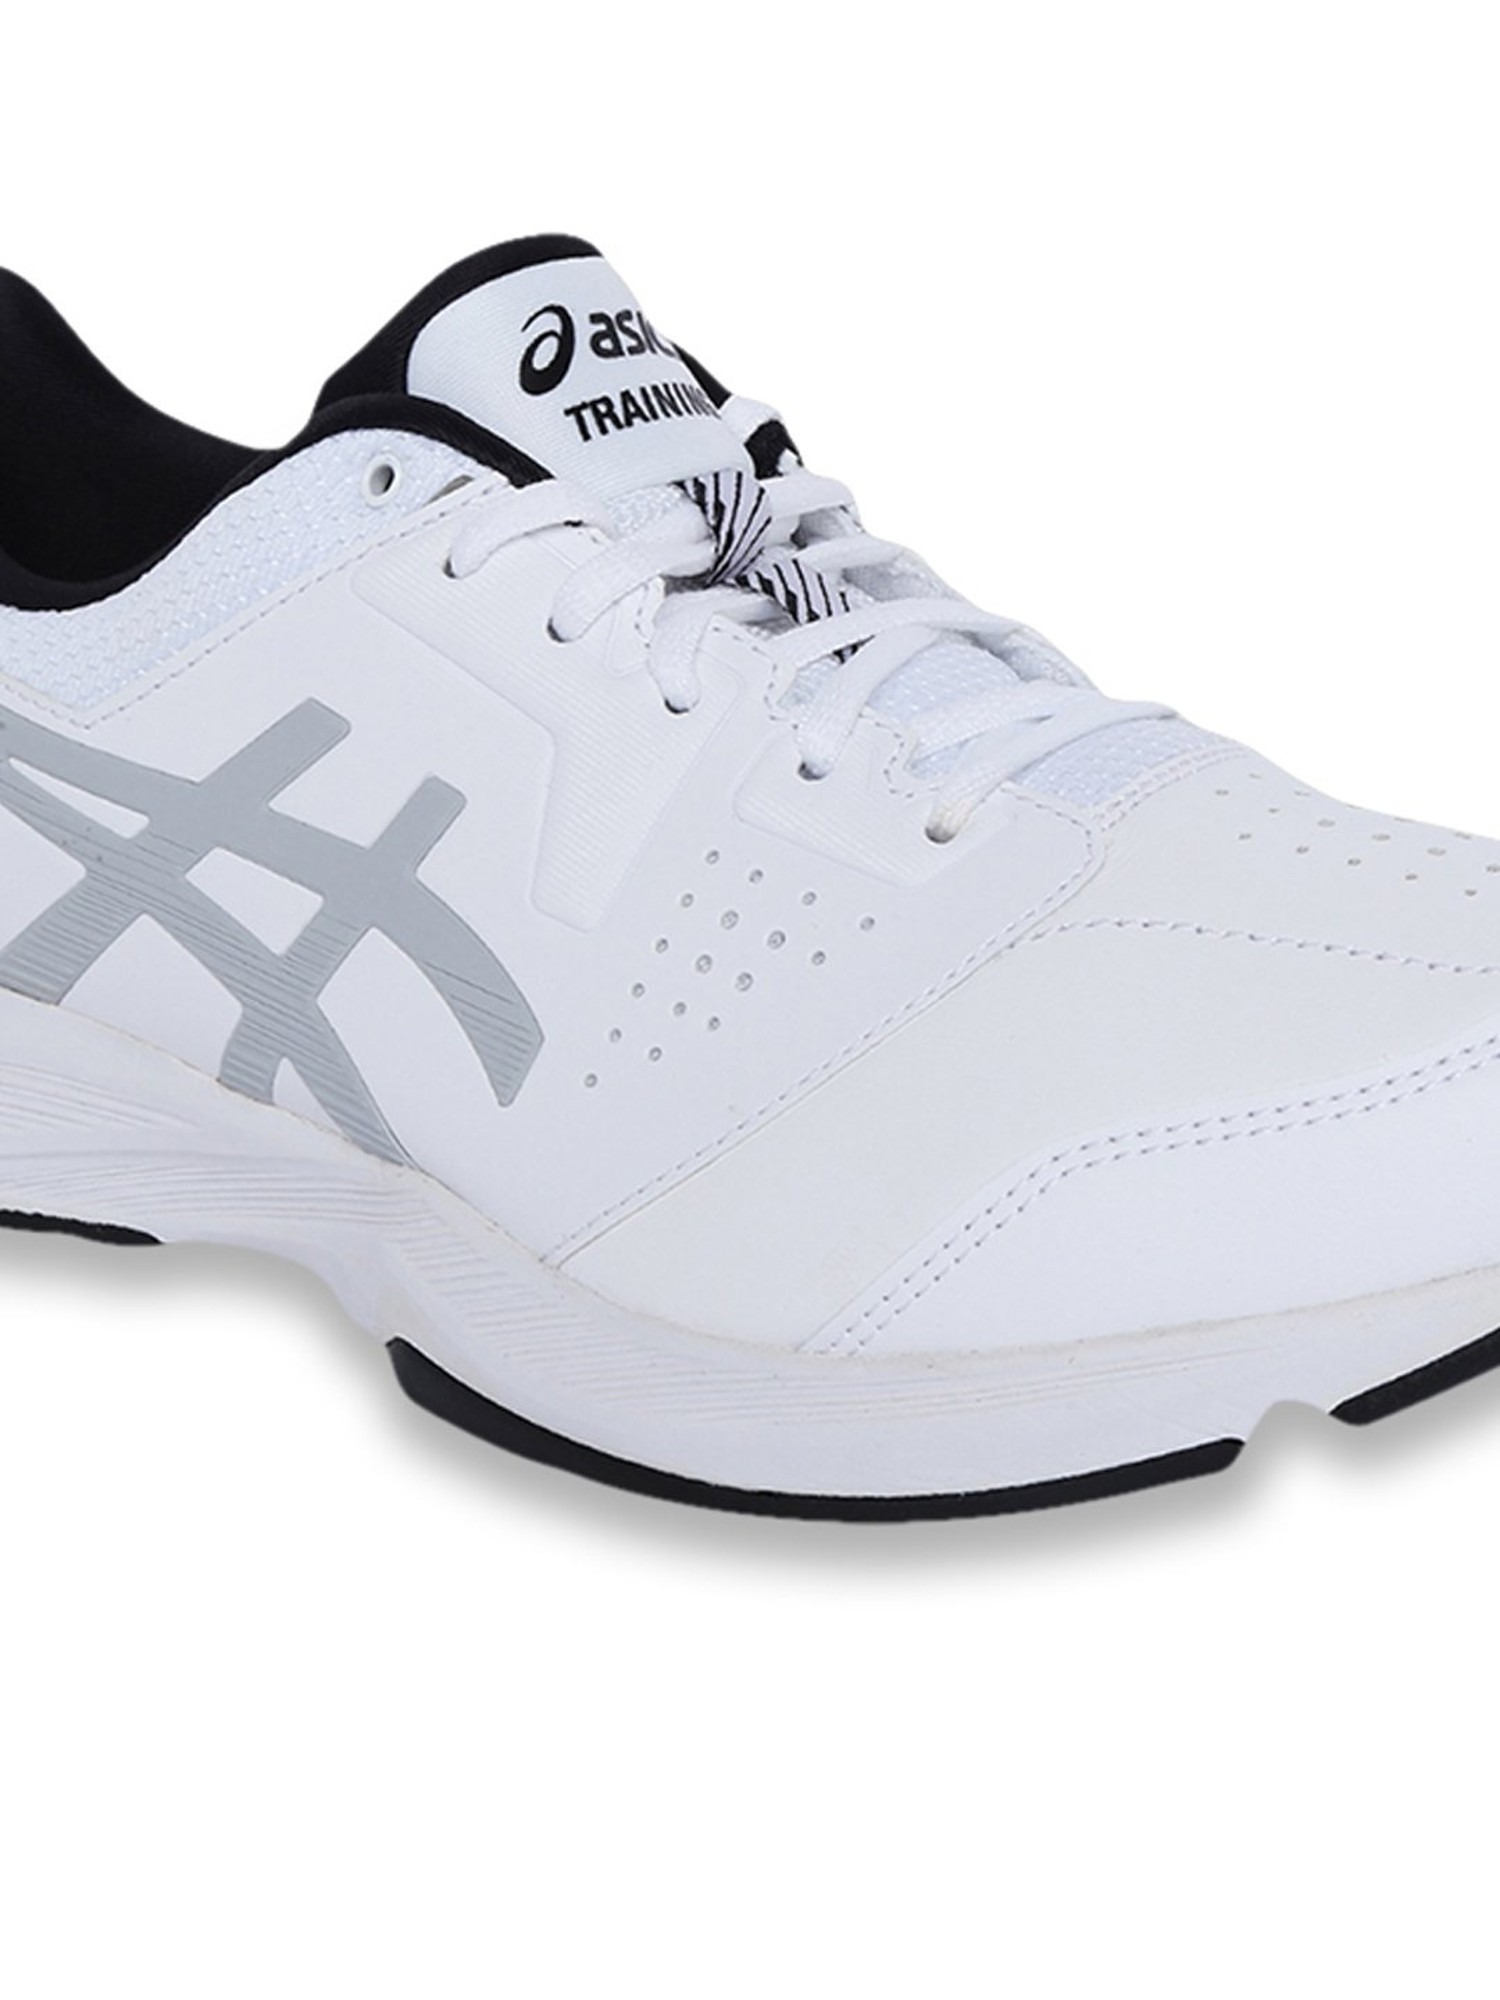 etc Abrasive Supplement Buy Asics Gel Quest FF White Training Shoes for Men at Best Price @ Tata  CLiQ